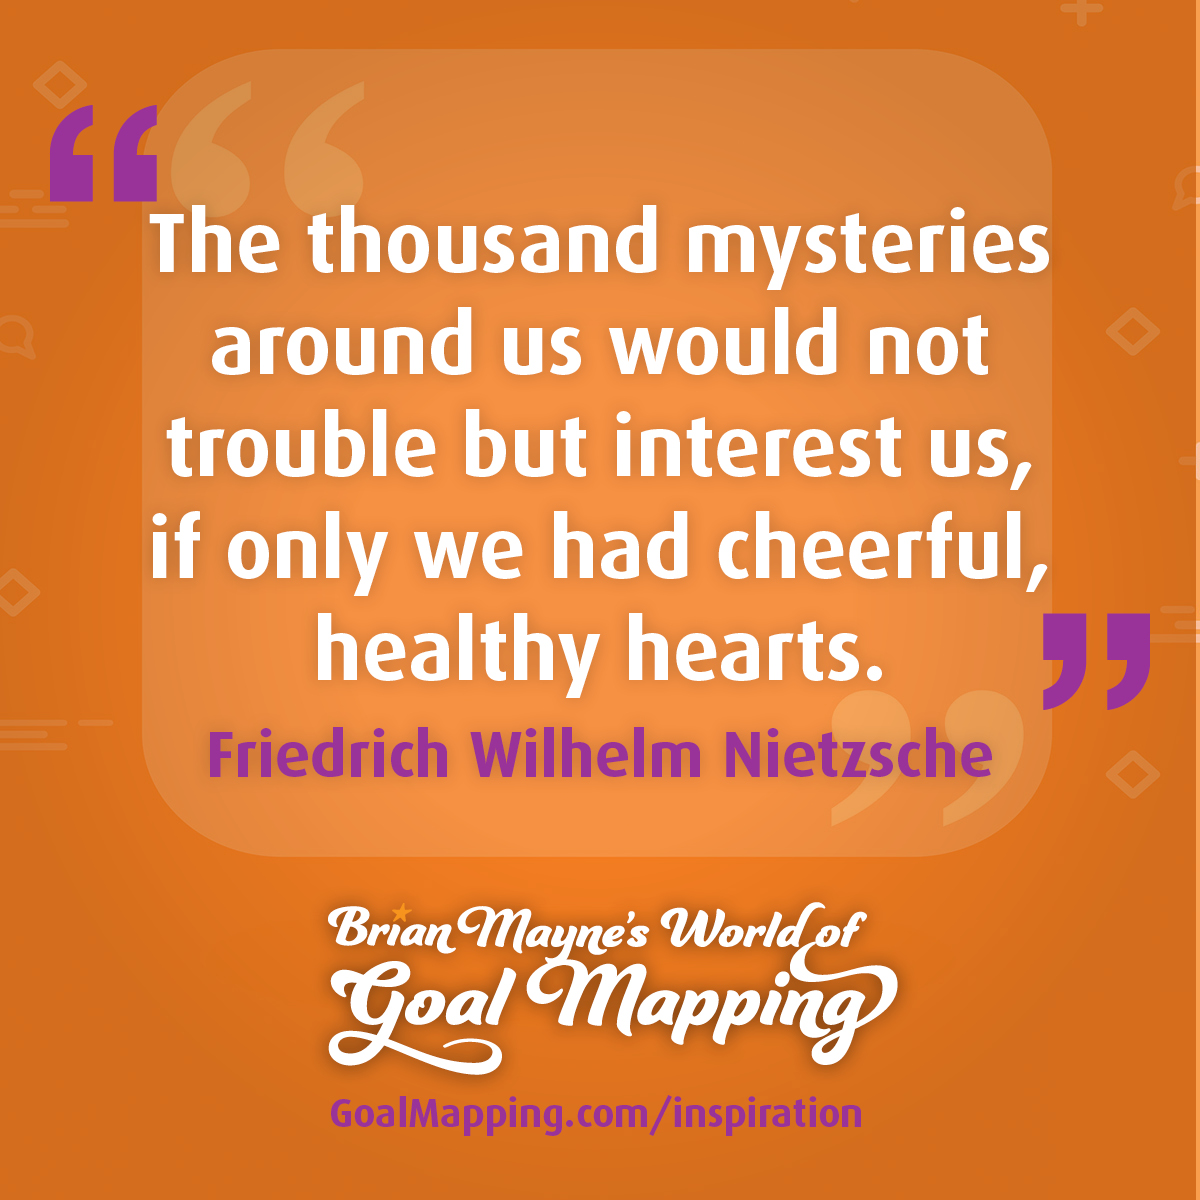 "The thousand mysteries around us would not trouble but interest us, if only we had cheerful, healthy hearts." Friedrich Wilhelm Nietzsche